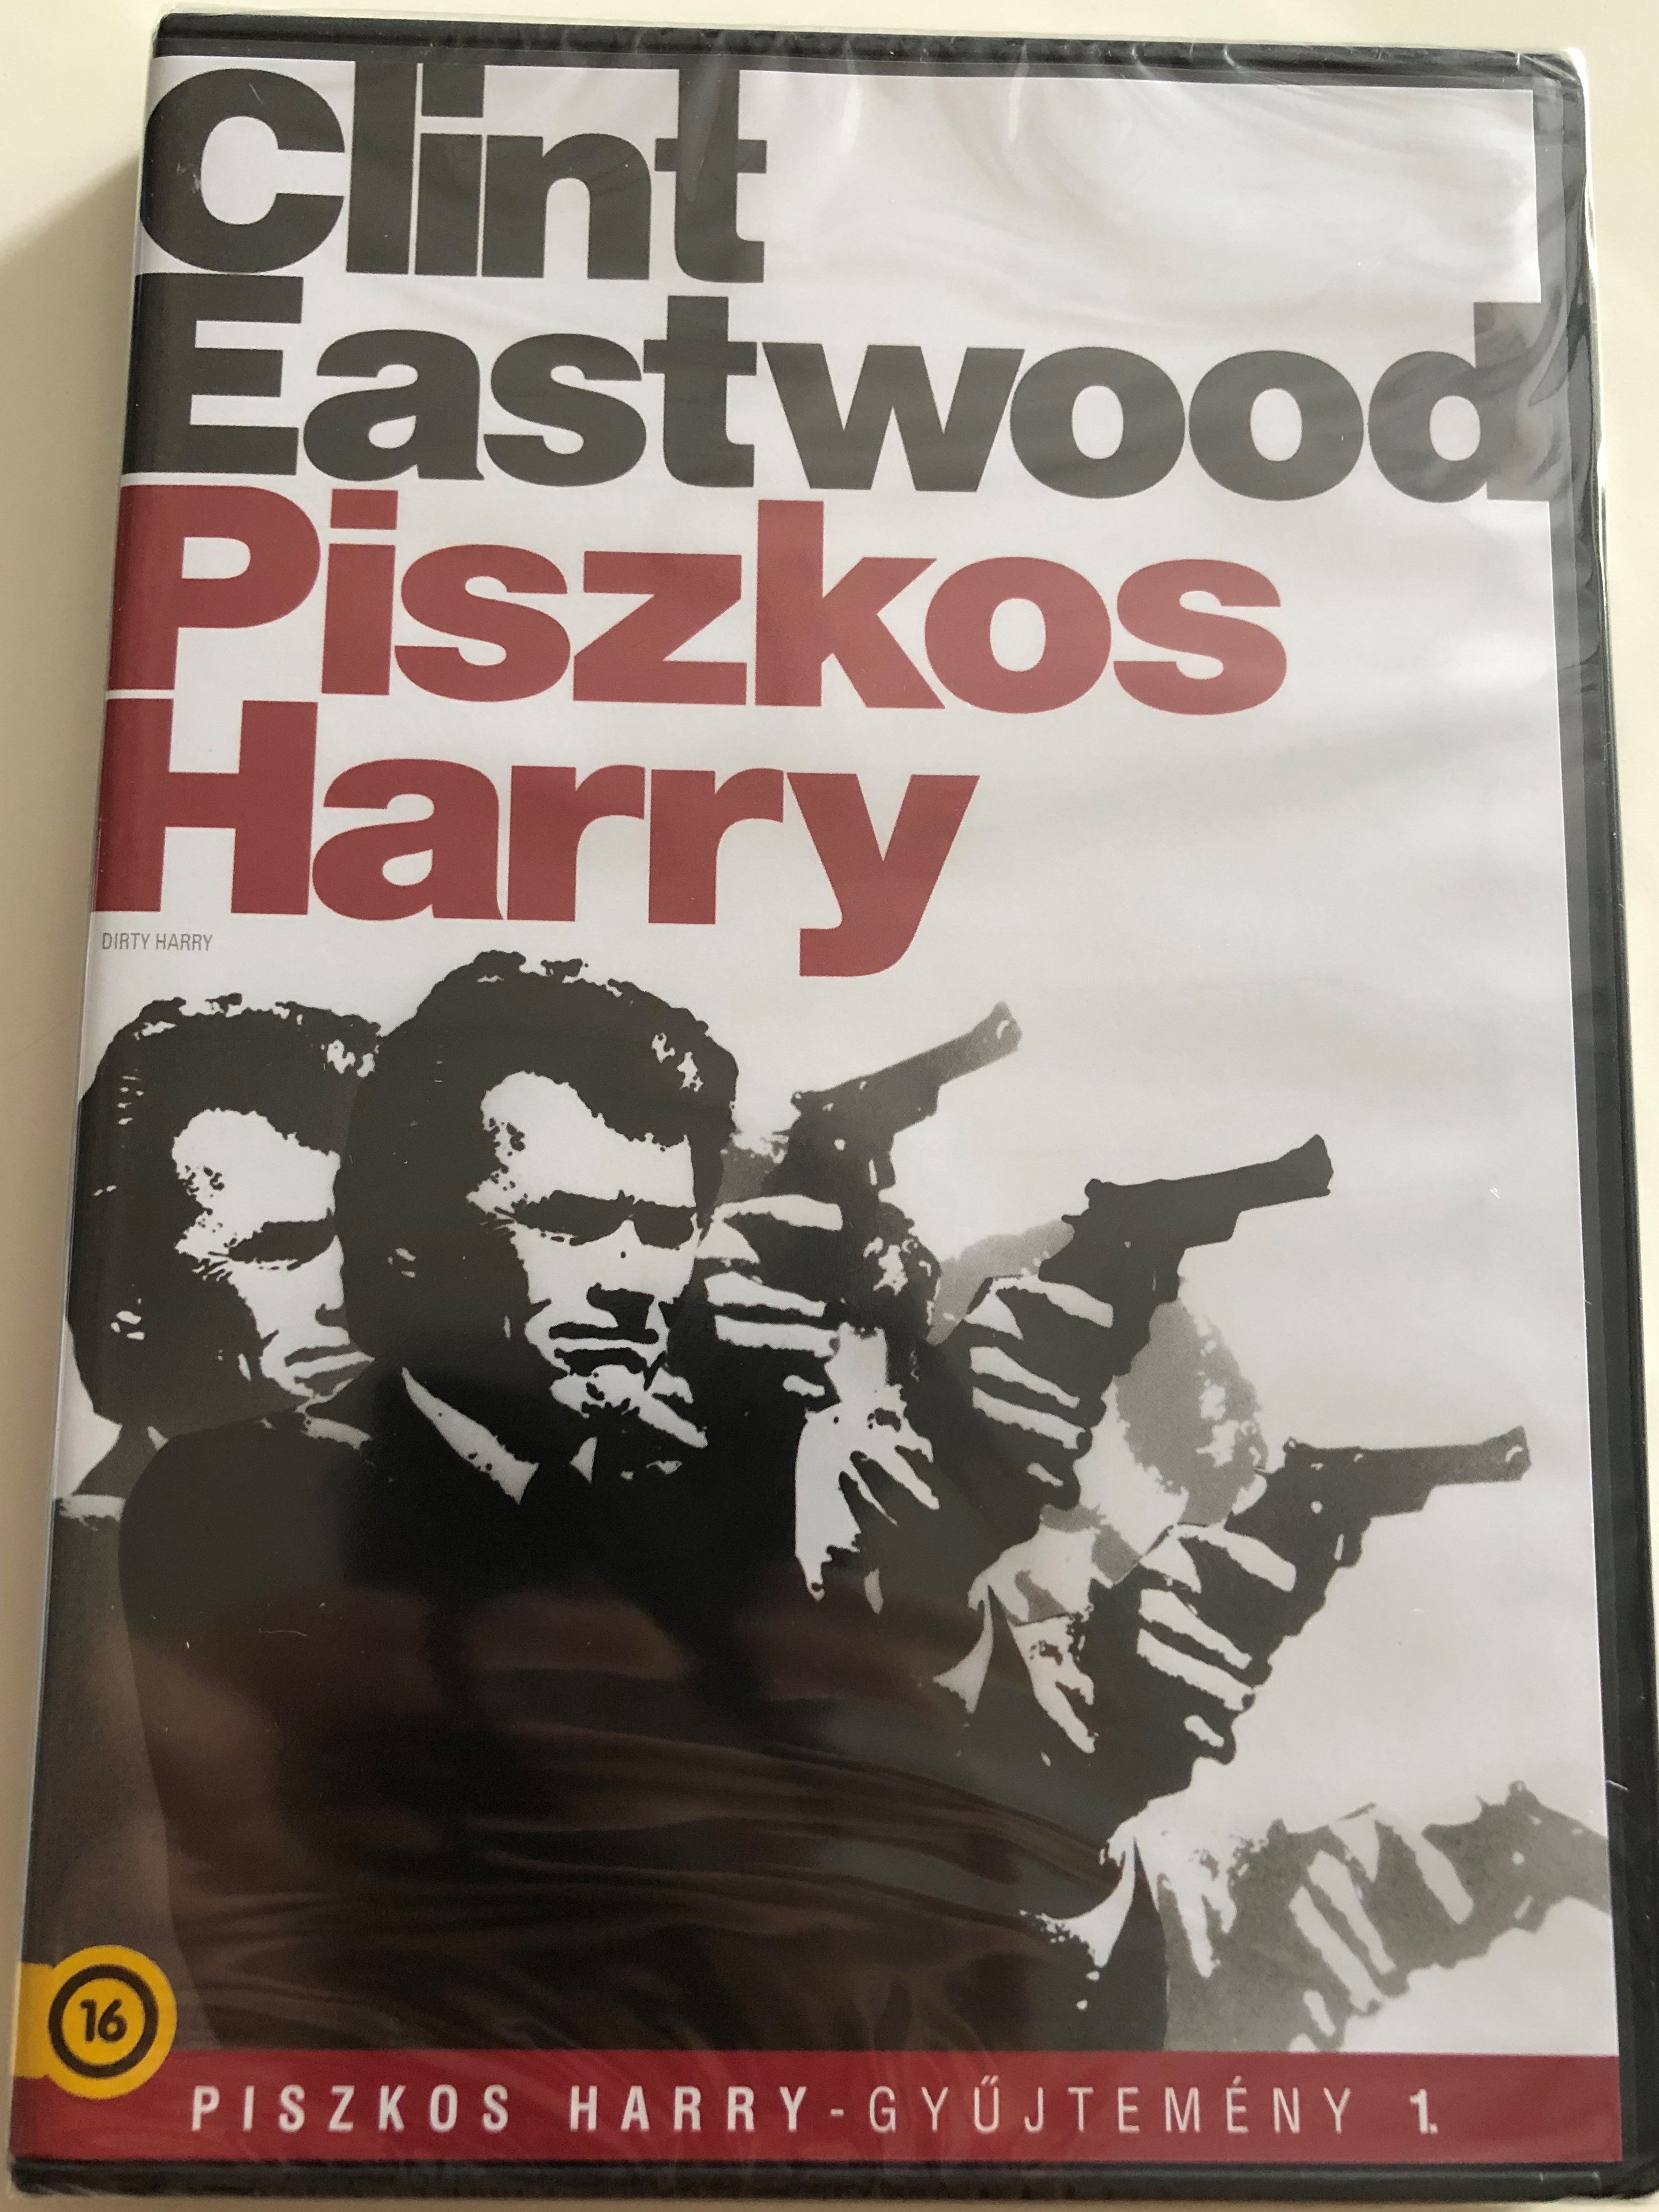 -dirty-harry-collection-vol-.-1-dvd-1971-piszkos-harry-gy-jtem-ny-1.-directed-by-don-siegel-starring-clint-eastwood-harry-guardino-reni-santoni-andy-robinson-1-.jpg